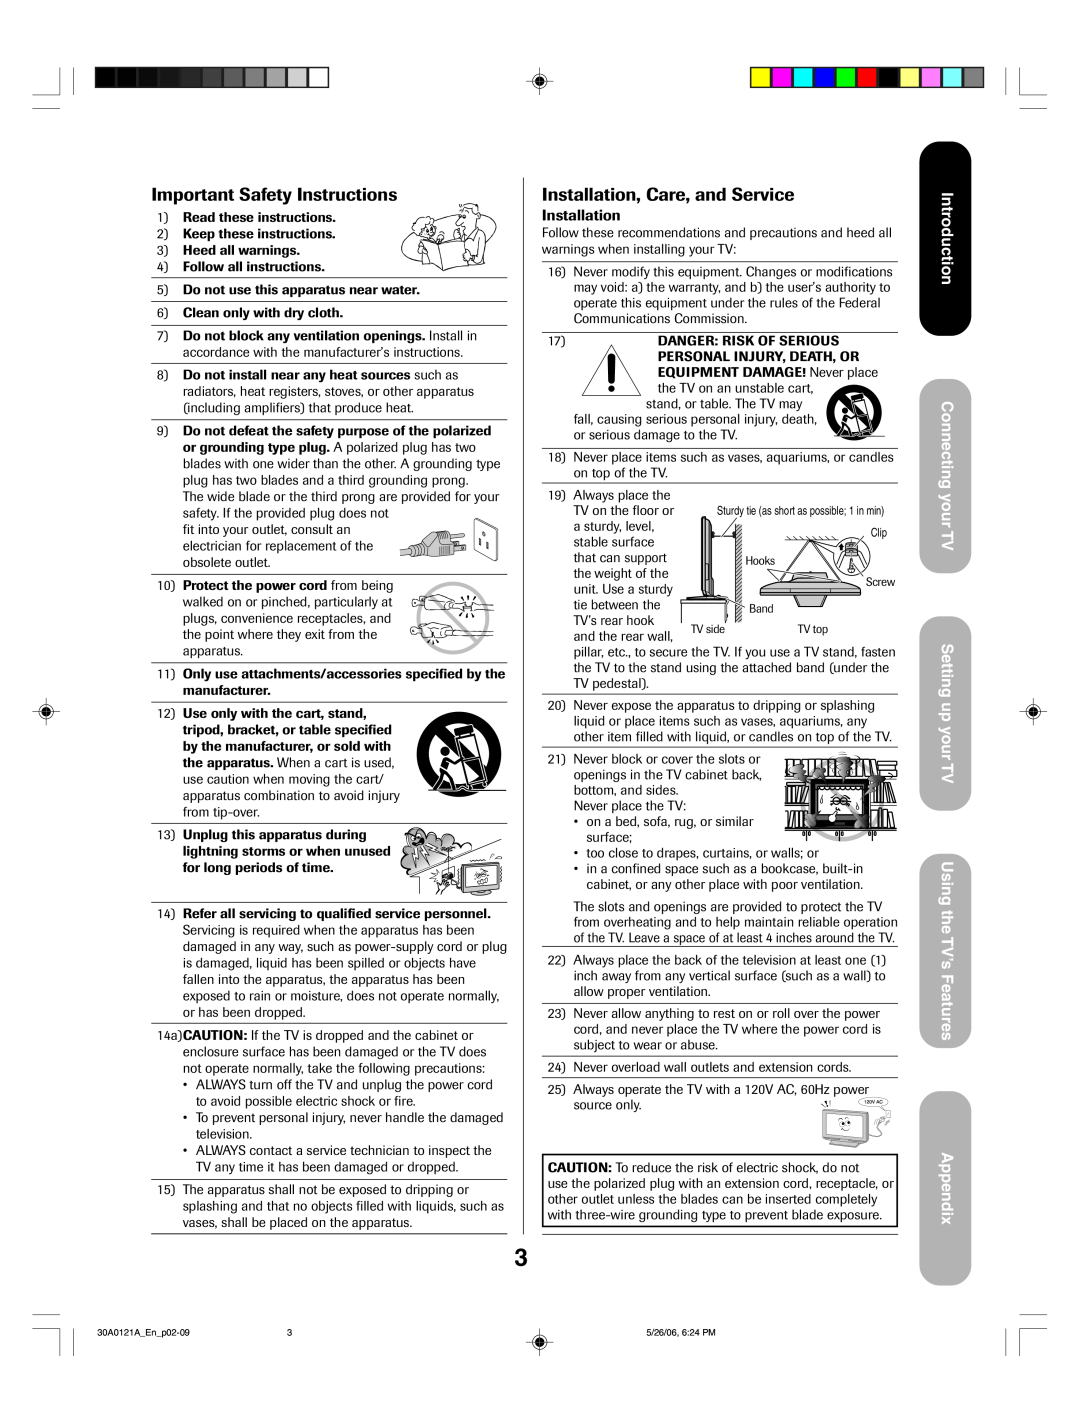 Toshiba 50HP86, 42HP86 Important Safety Instructions, Installation, Care, and Service, Using the TV’s Features Appendix 